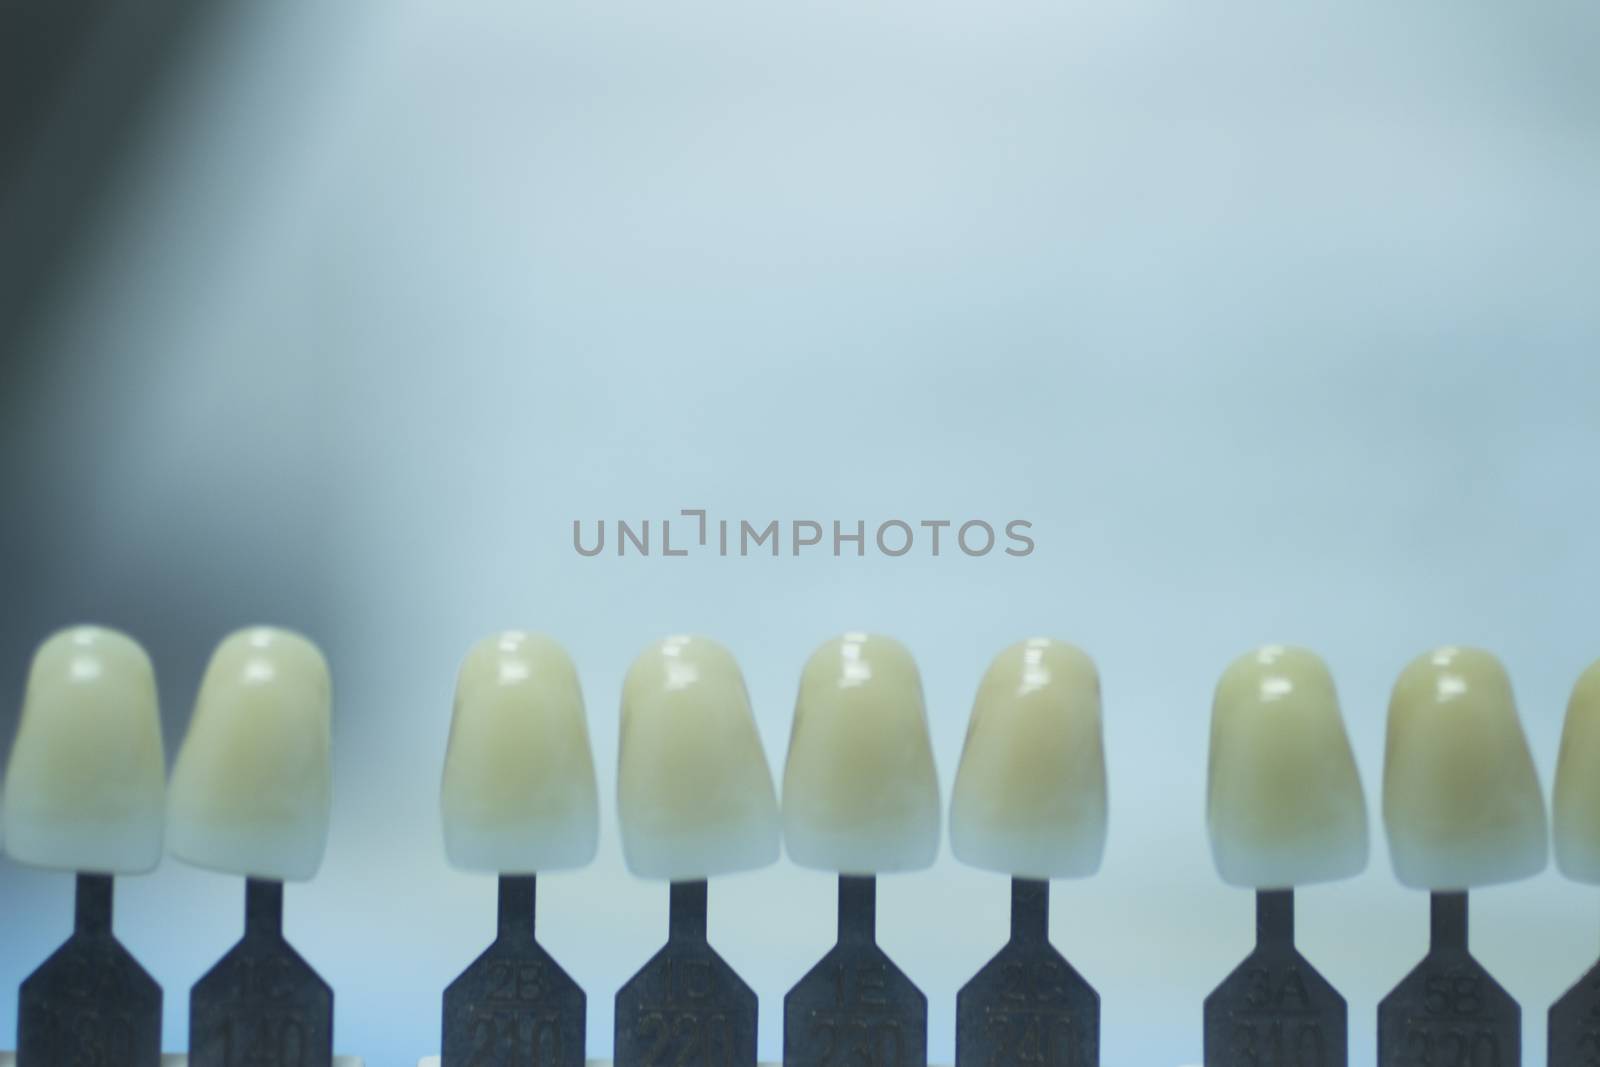 Dentist's tooth color guide used to choose the appropriate natural colors for a patient's tooth implants and crowns on plain blue background of the dental surgery clinic table. Close-up macro photo. 